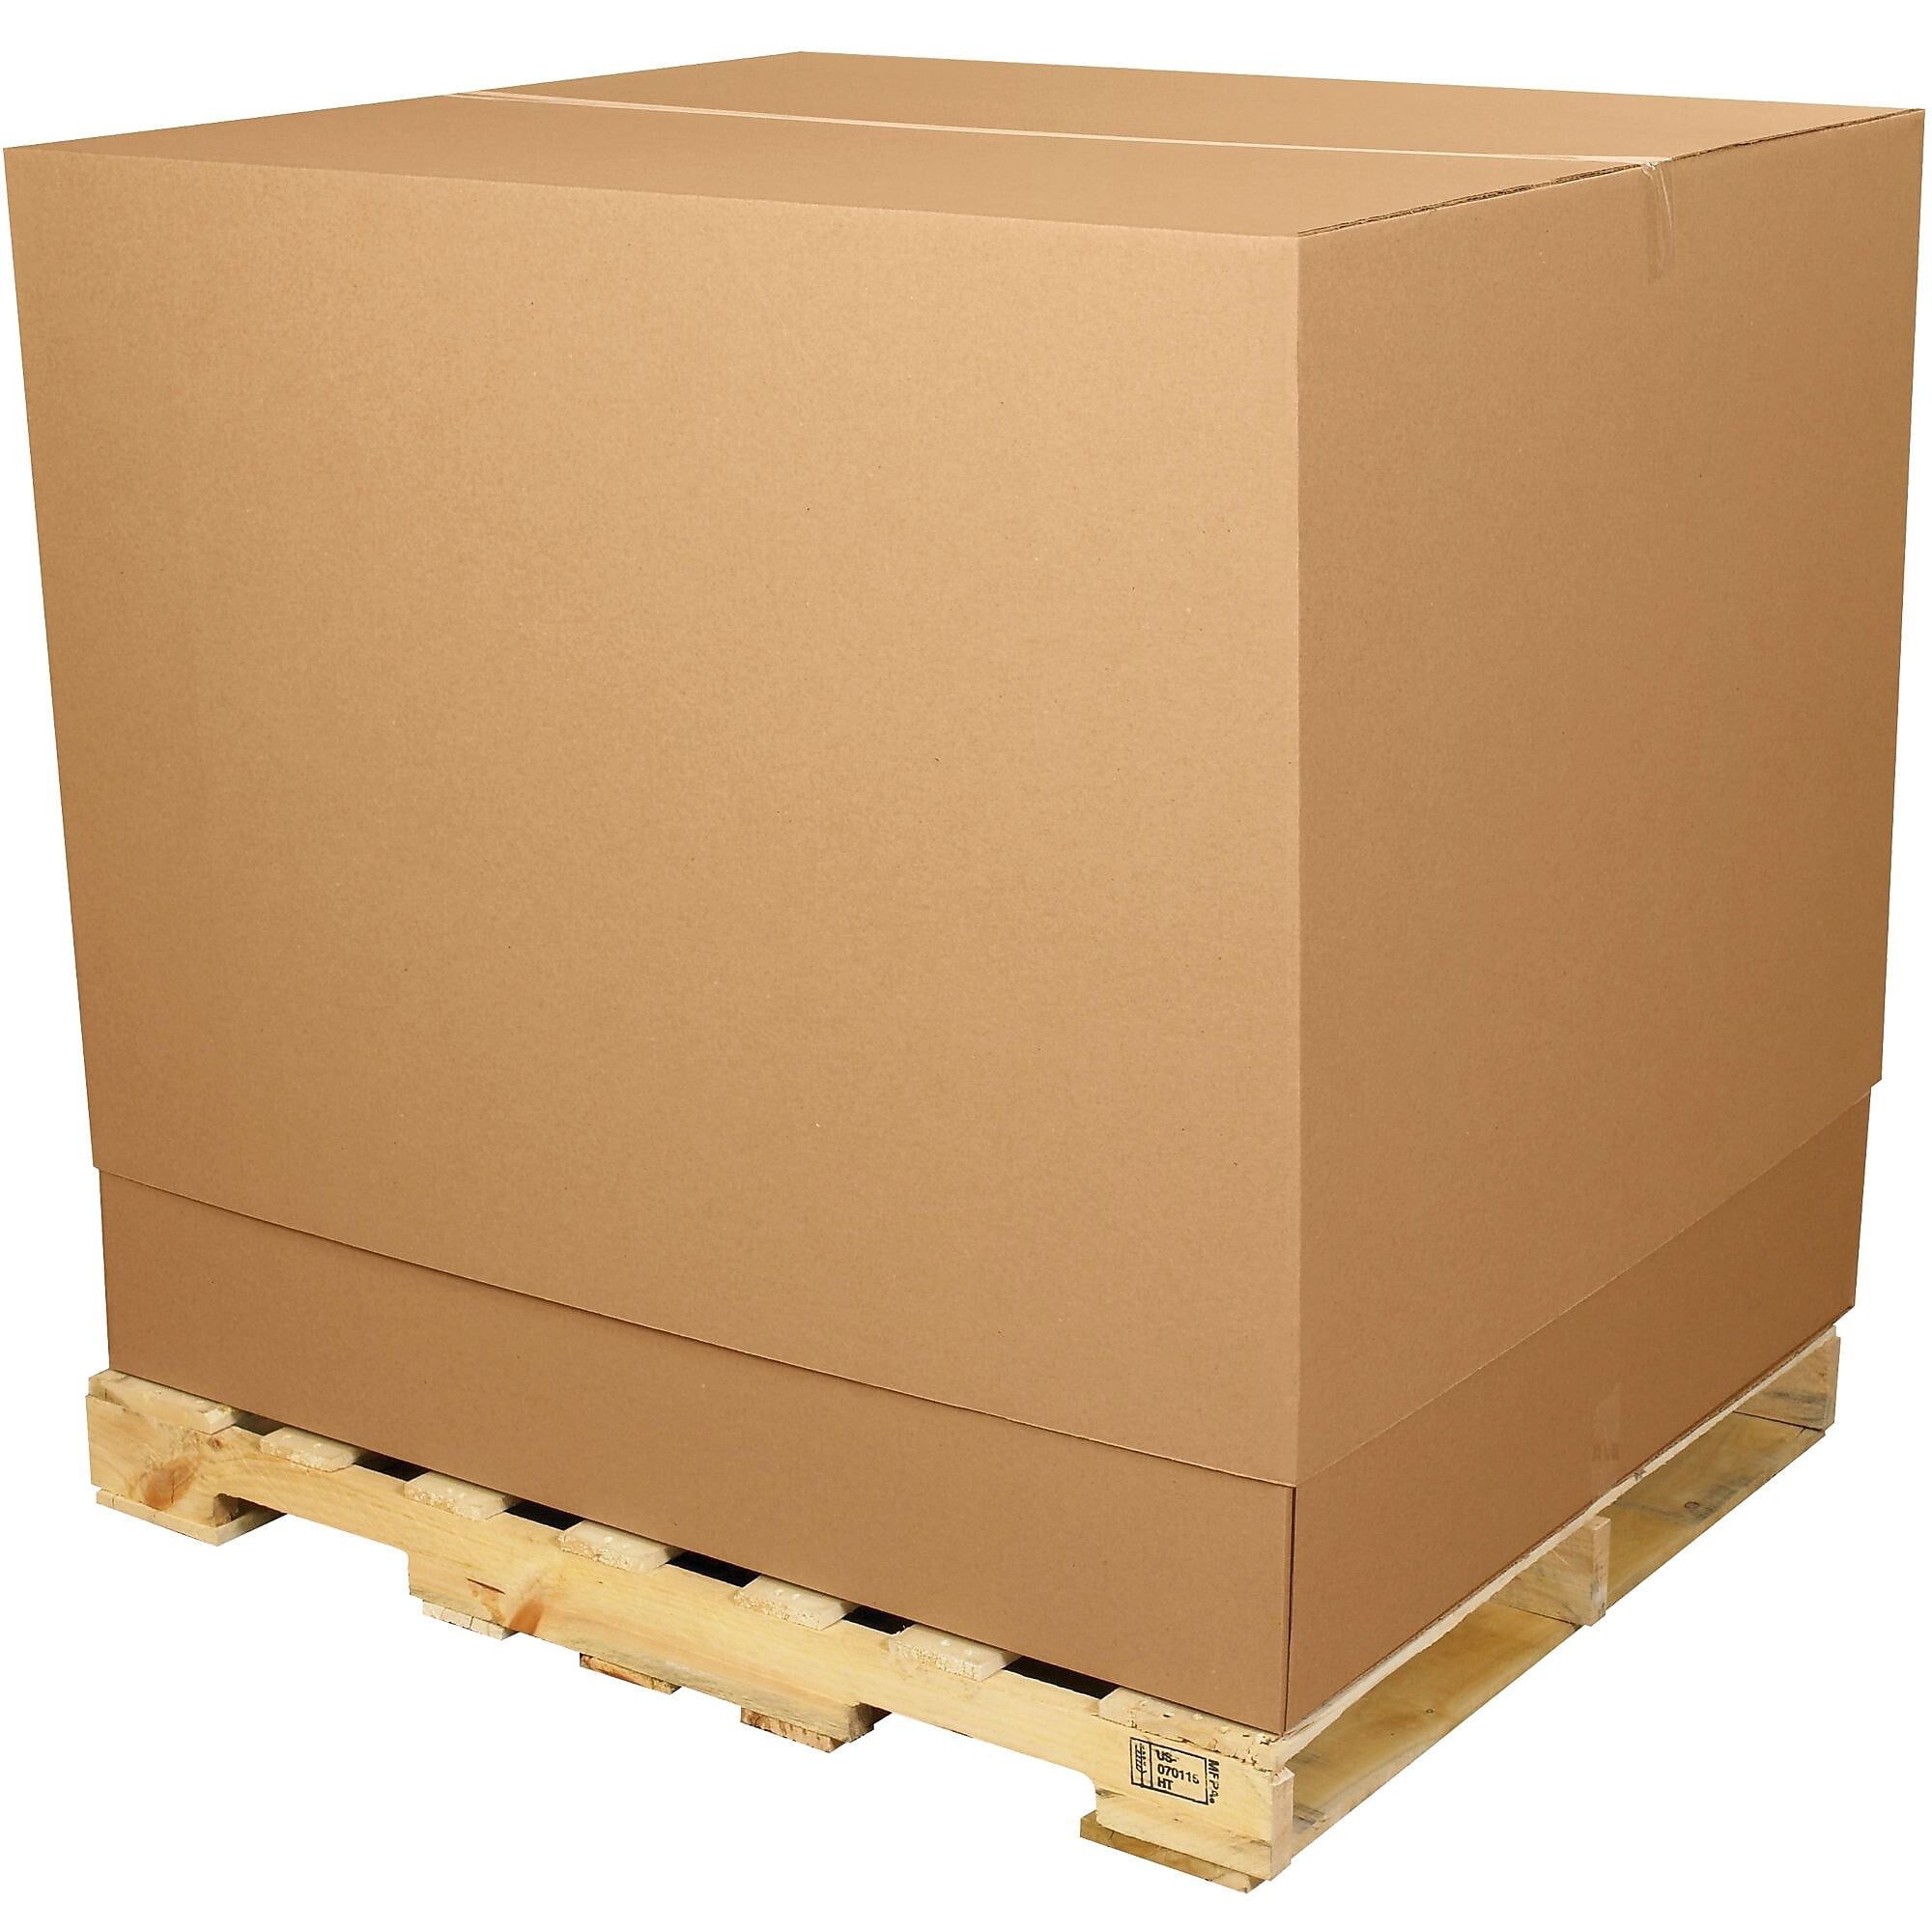 5 X-LARGE D/W CARDBOARD REMOVAL MOVING BOXES 24x18x18" 